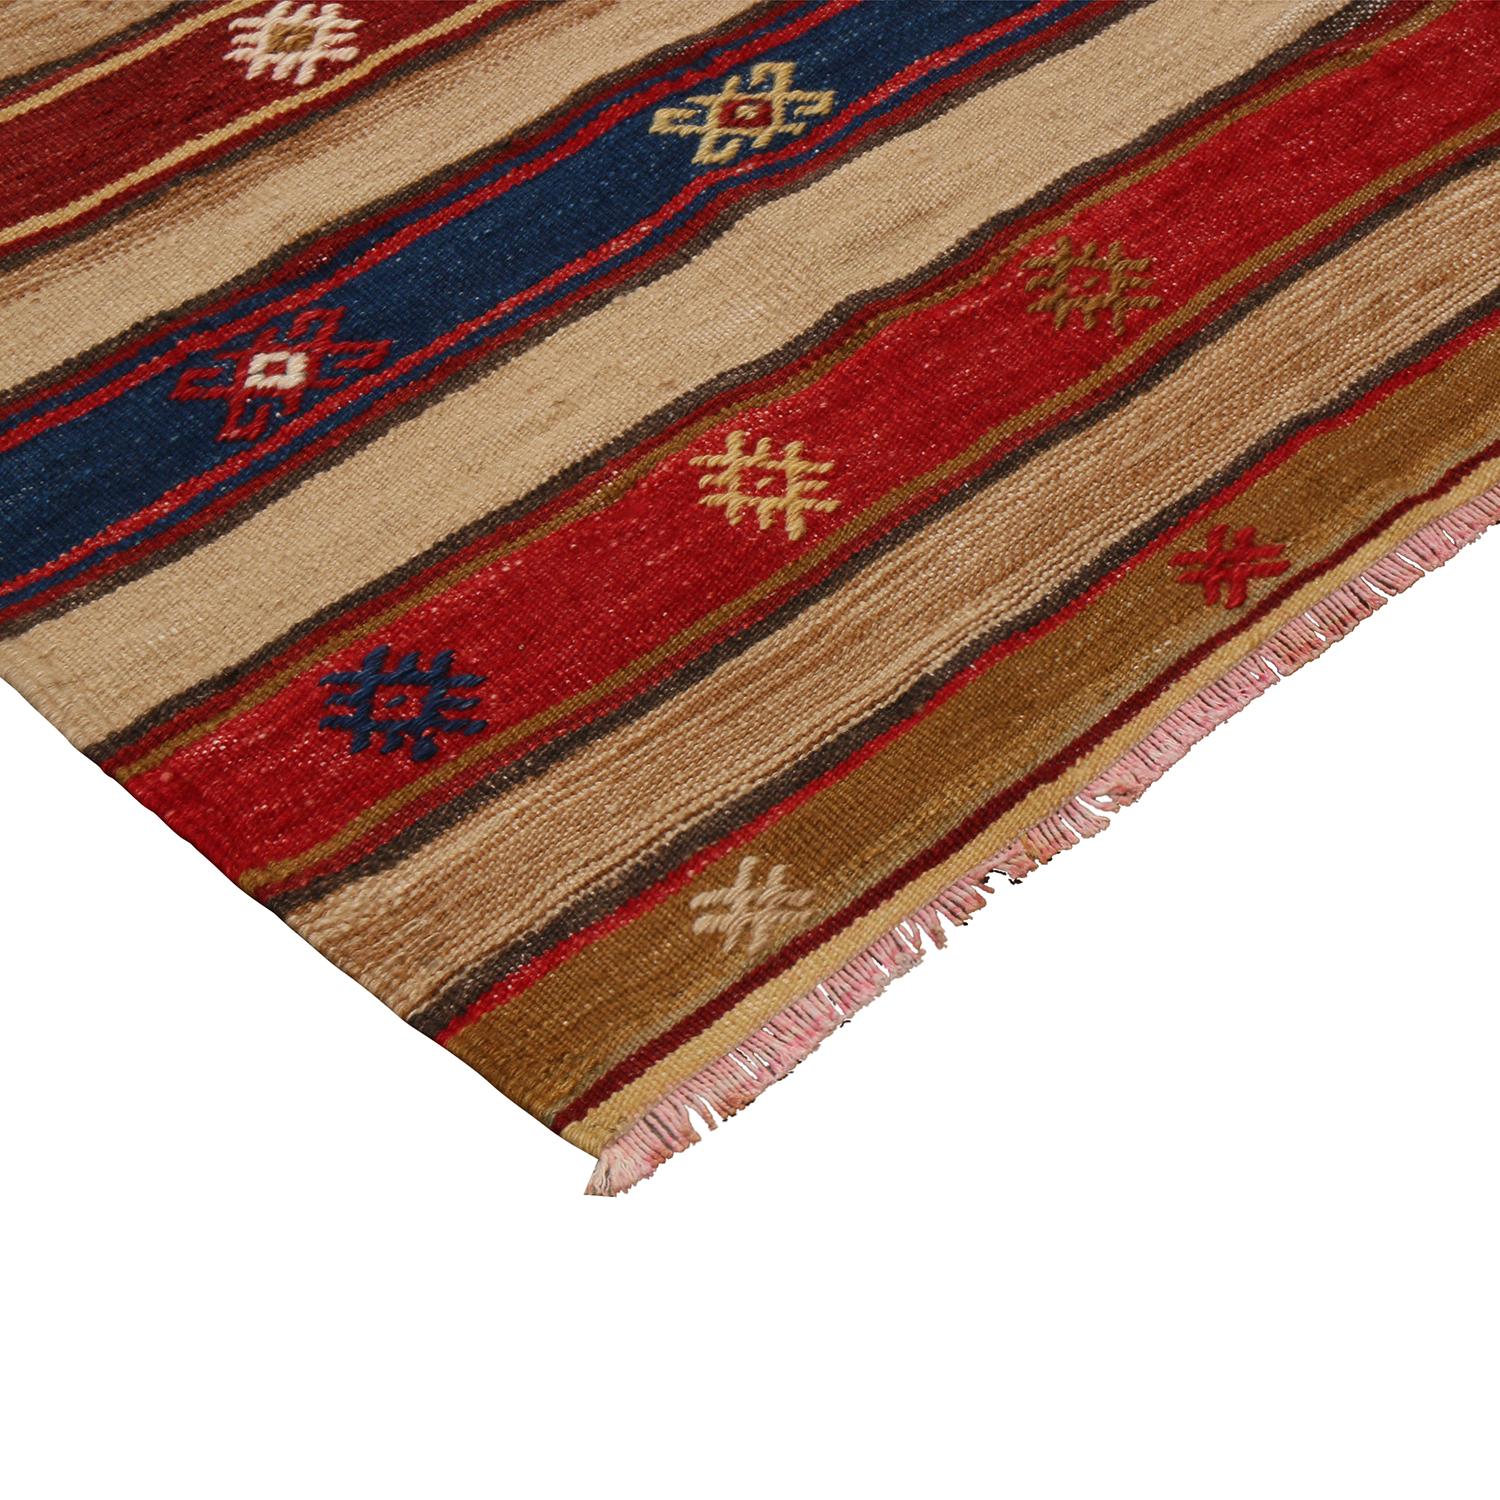 Hand-Woven Vintage Fathiye Geometric Beige-Brown Wool Kilim with Red and Navy Blue Stripes